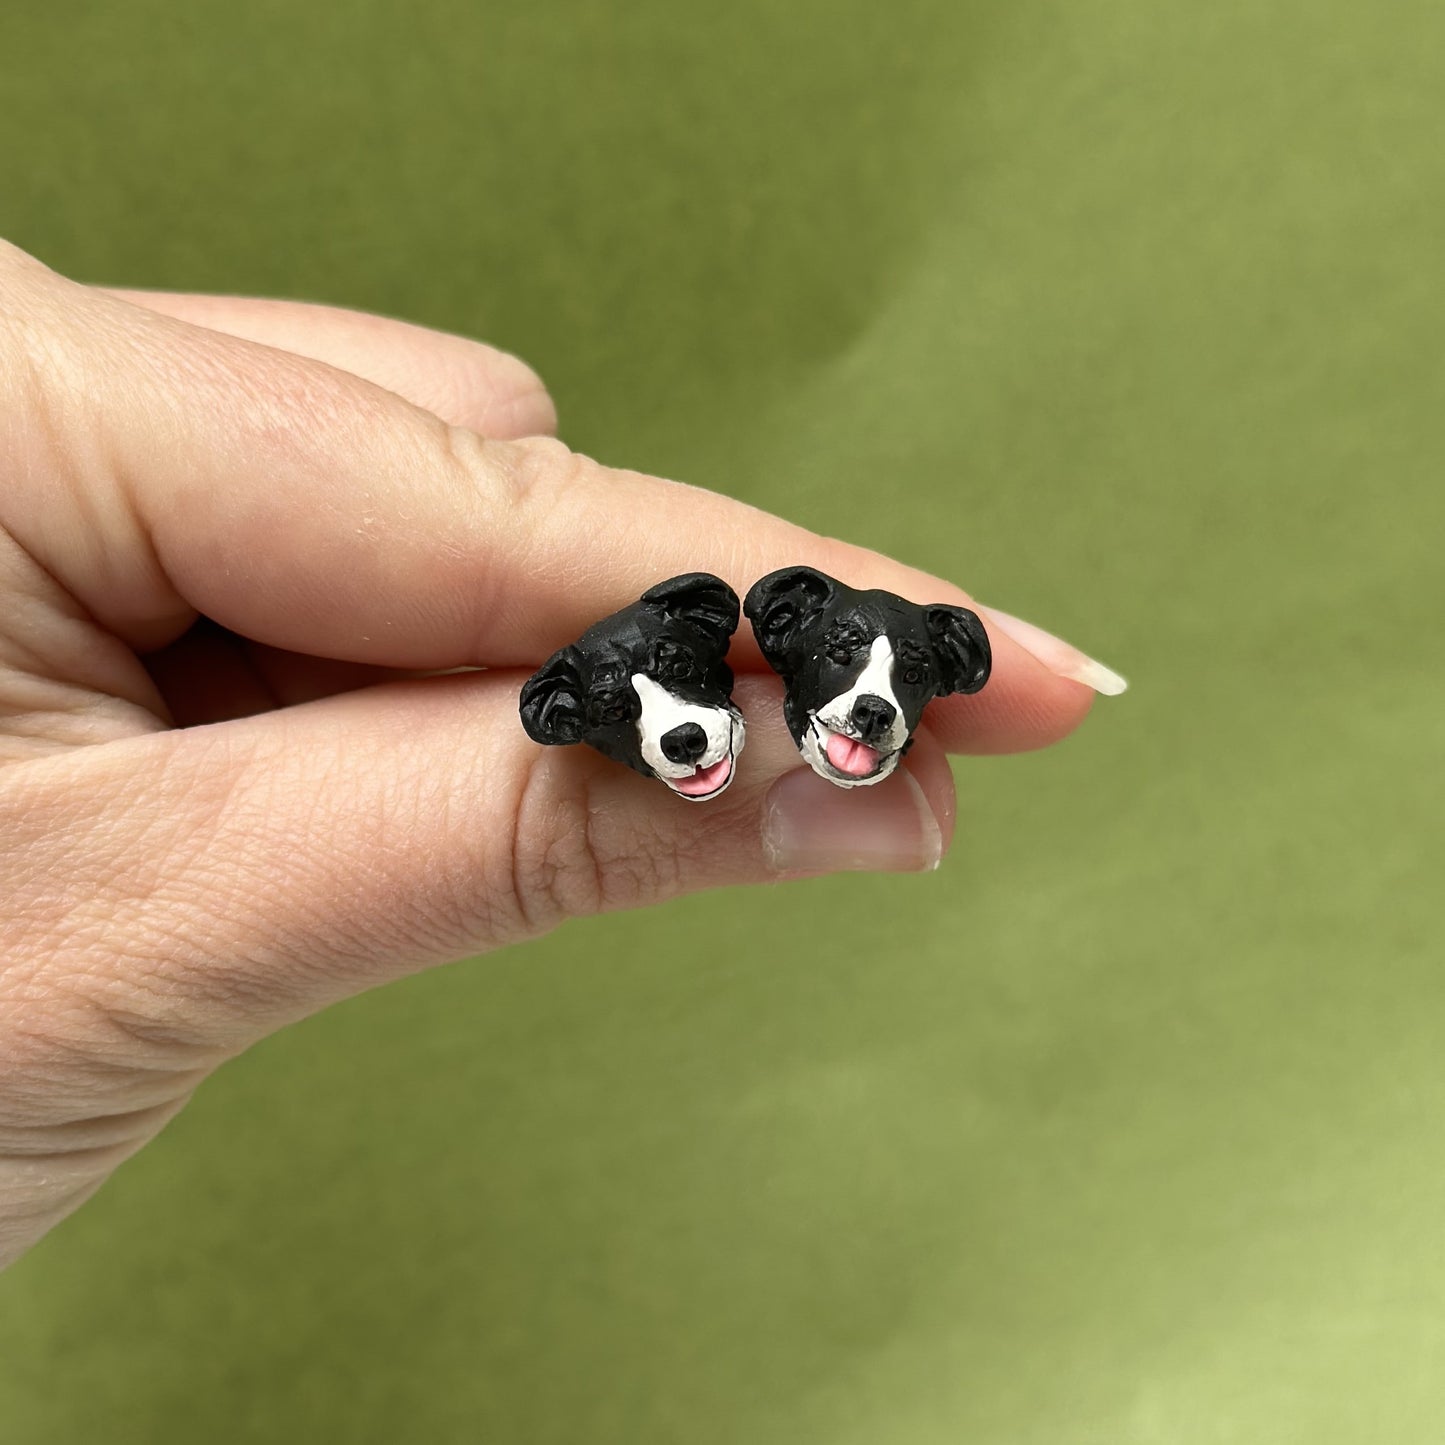 Handmade border collie stud earrings by Pawfect Love, positioned in front of green background